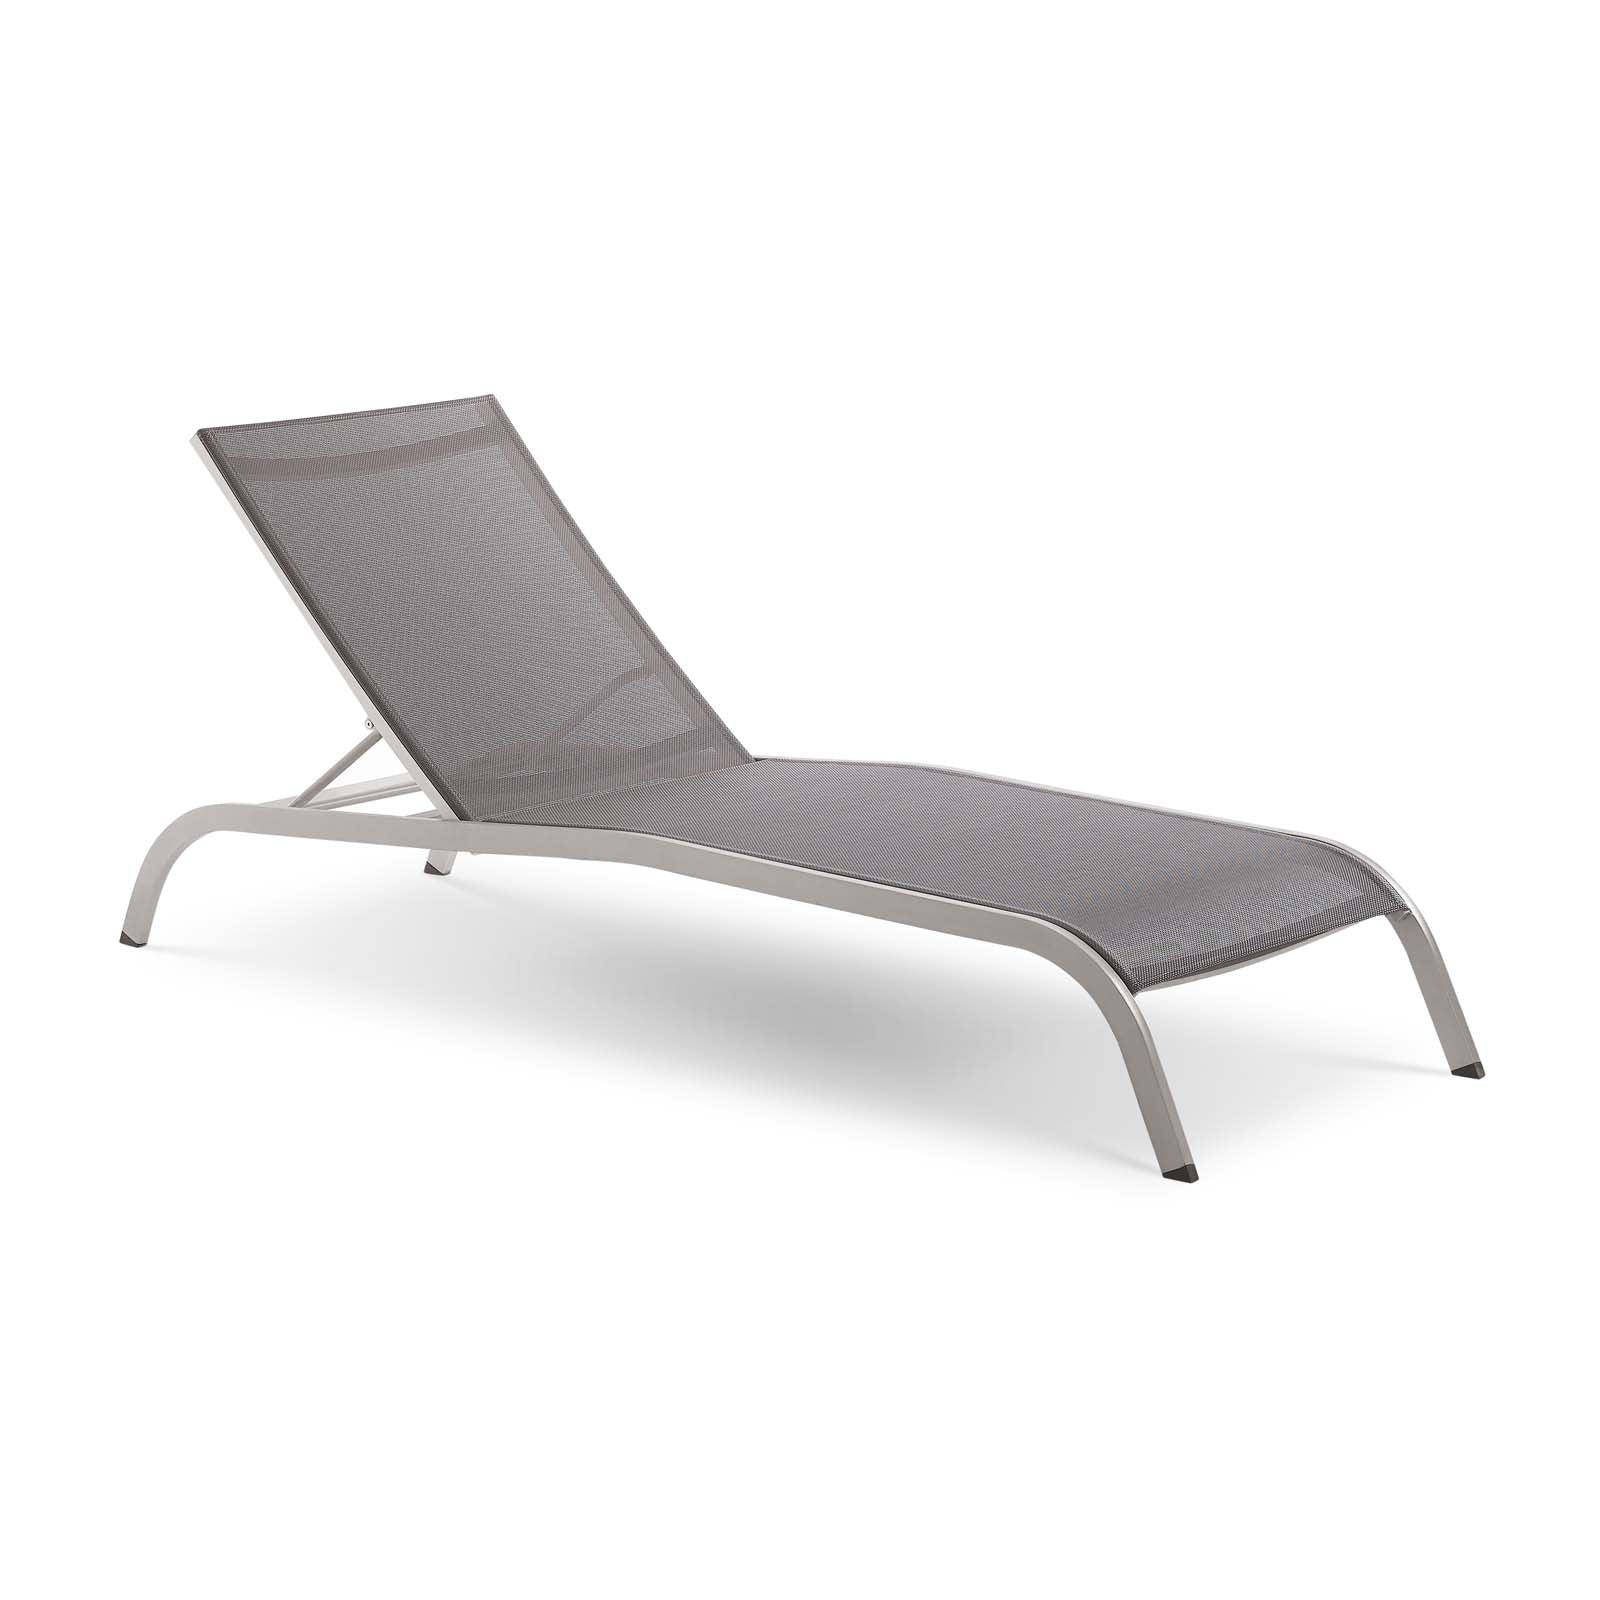 Modway Outdoor Loungers - Savannah Mesh Chaise Outdoor Patio Aluminum Lounge Chair Gray